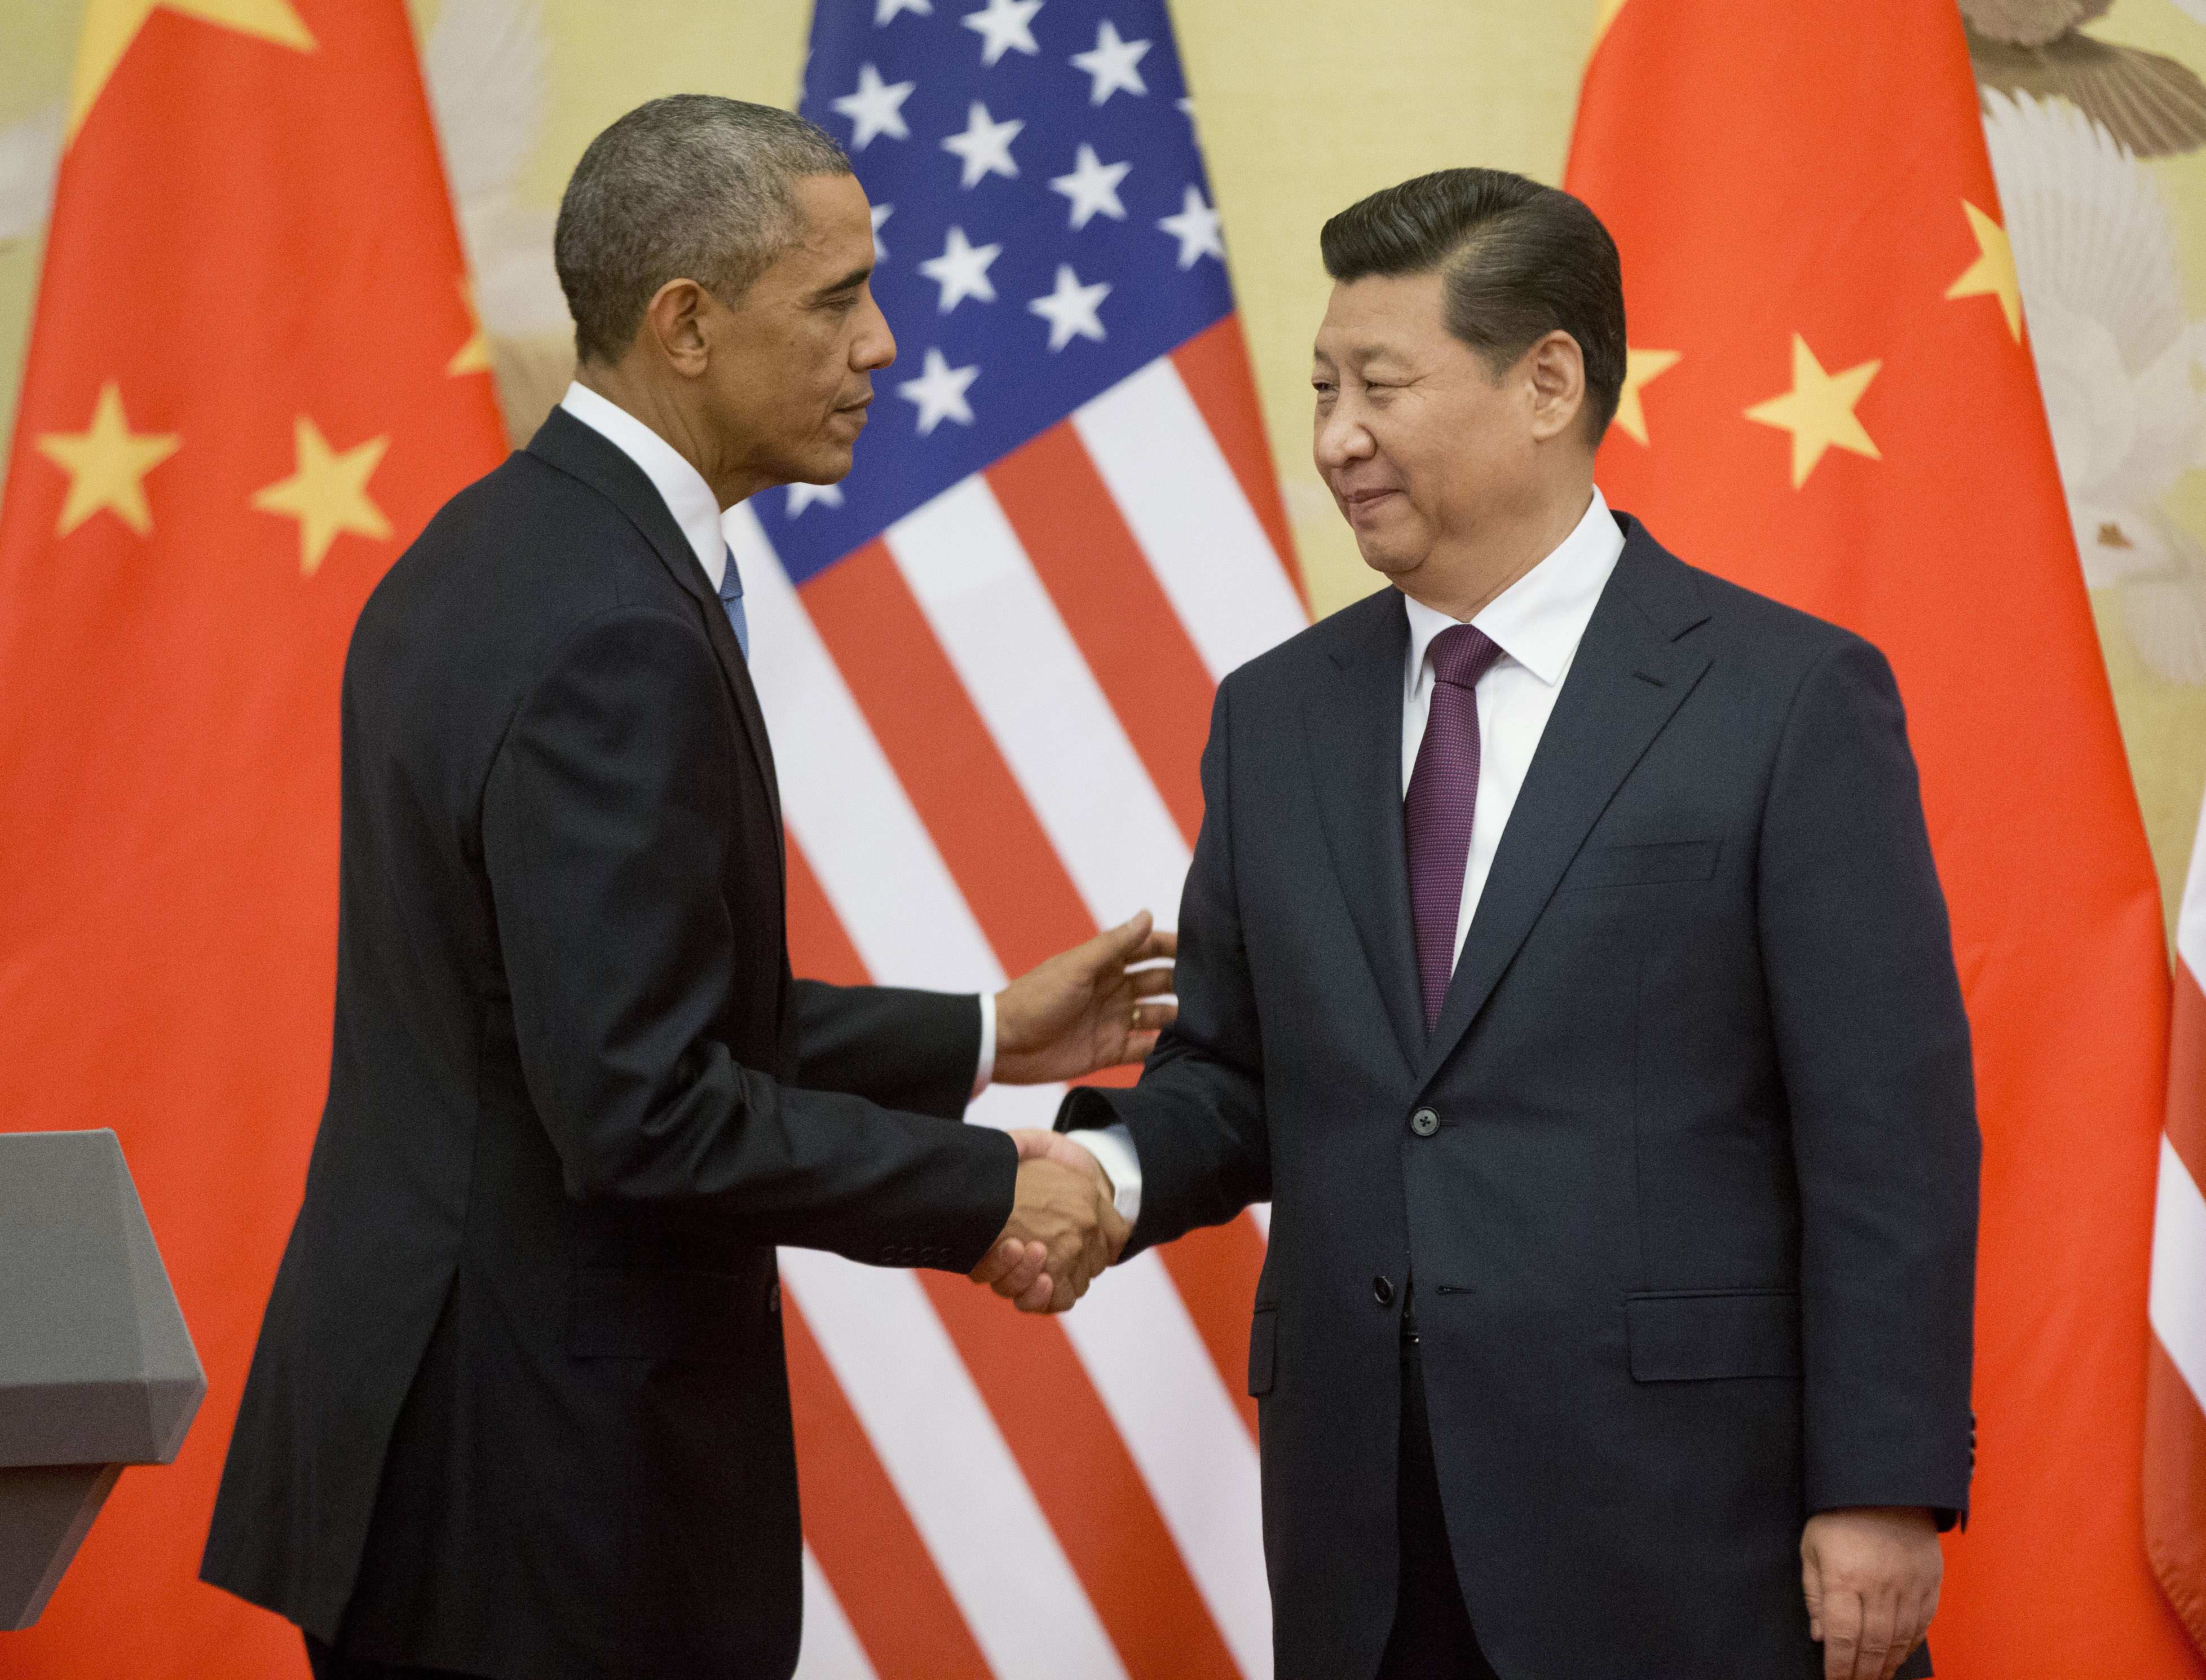 US President Barack Obama and Chinese President Xi Jinping shake hands after a meeting in Beijing last year. Both countries are still engaged in the 'great game' to advance their own interests as the two most powerful countries in the world. Photo: AP 